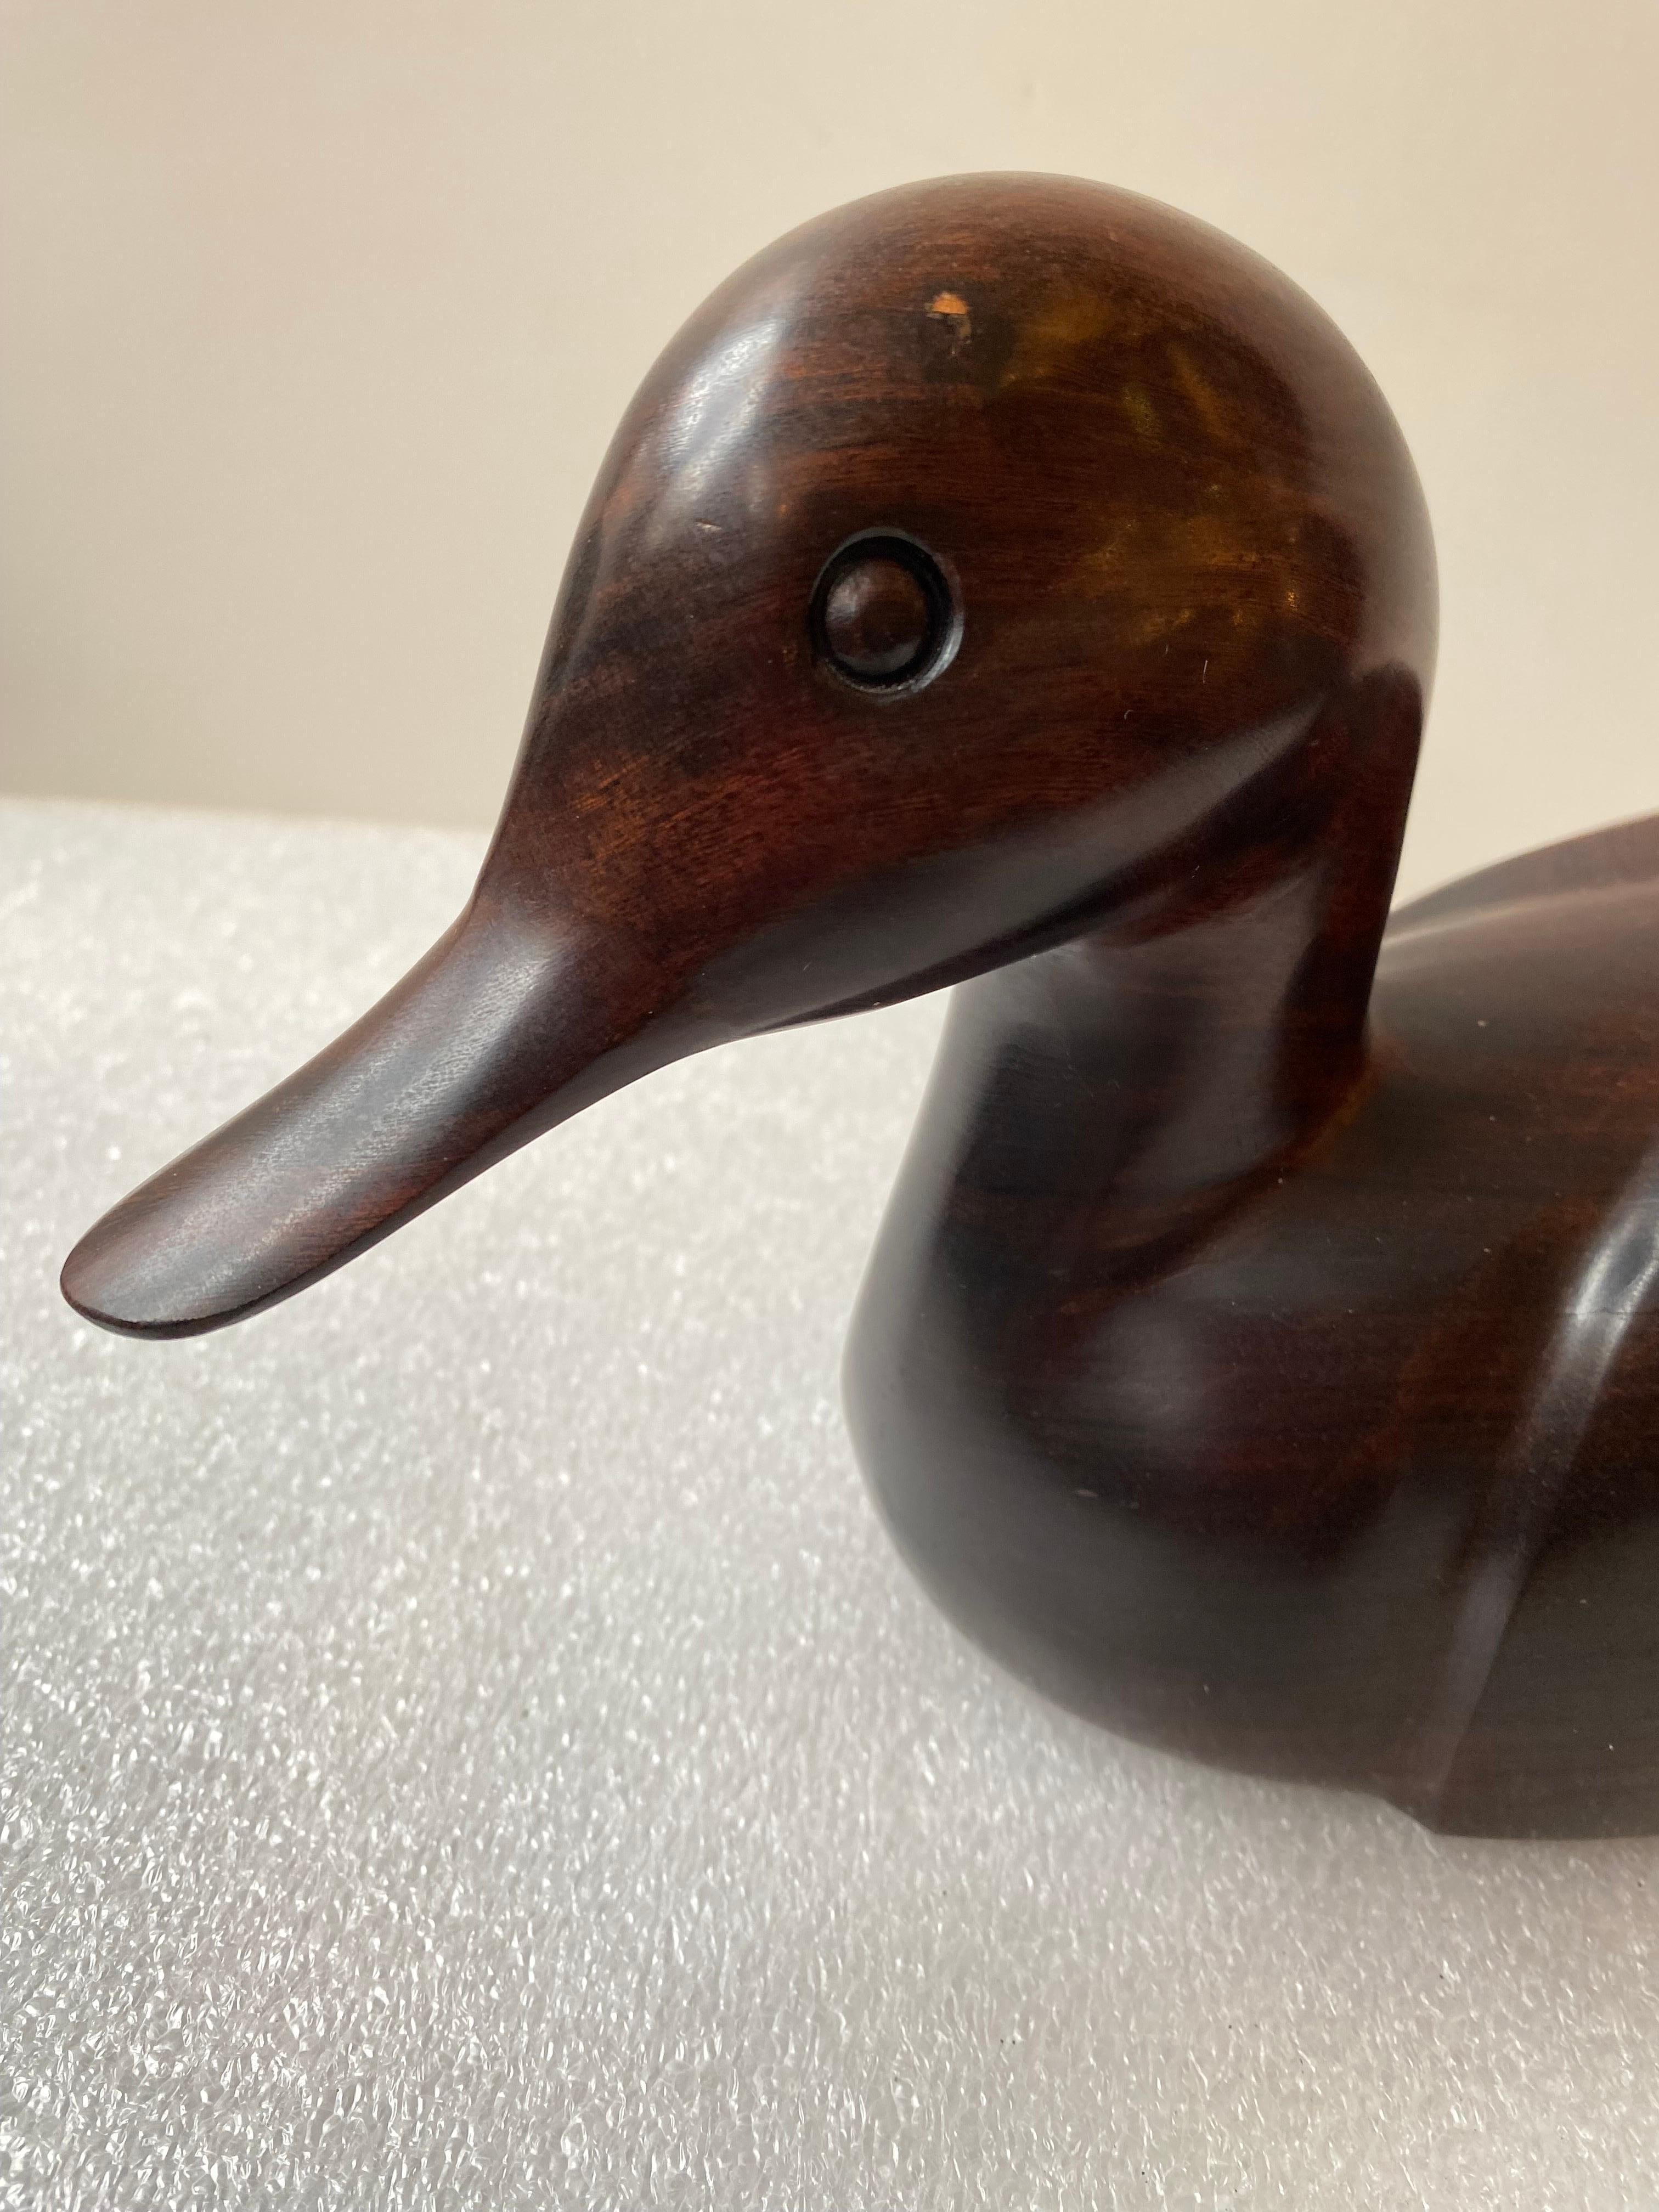 Thomas Suby carved duck sculpture. Represented by Breckenridge Art Gallery/ Breckenridge Colorado. This piece probably dates to the Mid-1980s. Beautifully done and amazing wood! Possibly Sonoran Ironwood.